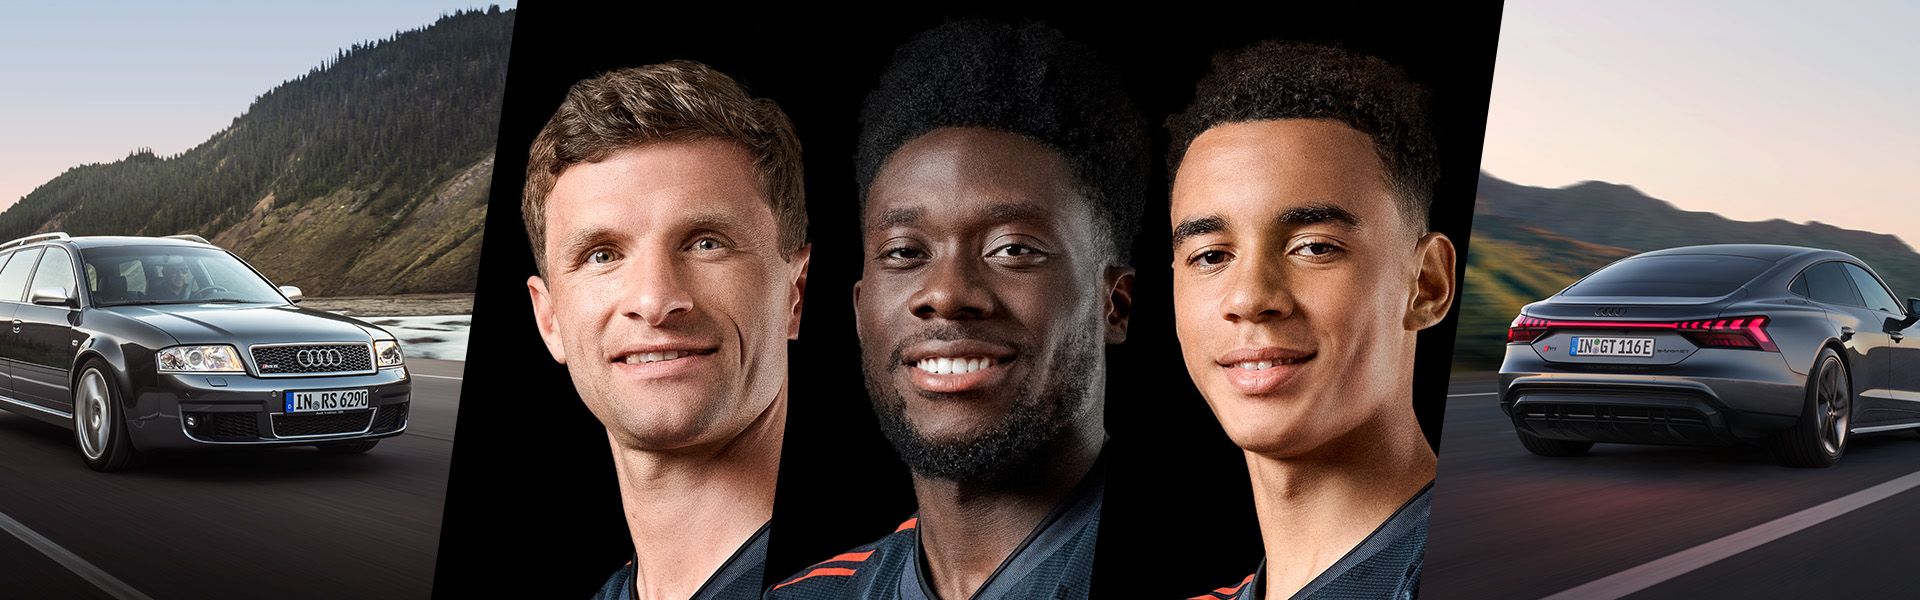 Collage with Thomas Müller, Alphonso Davies and Jamal Musiala